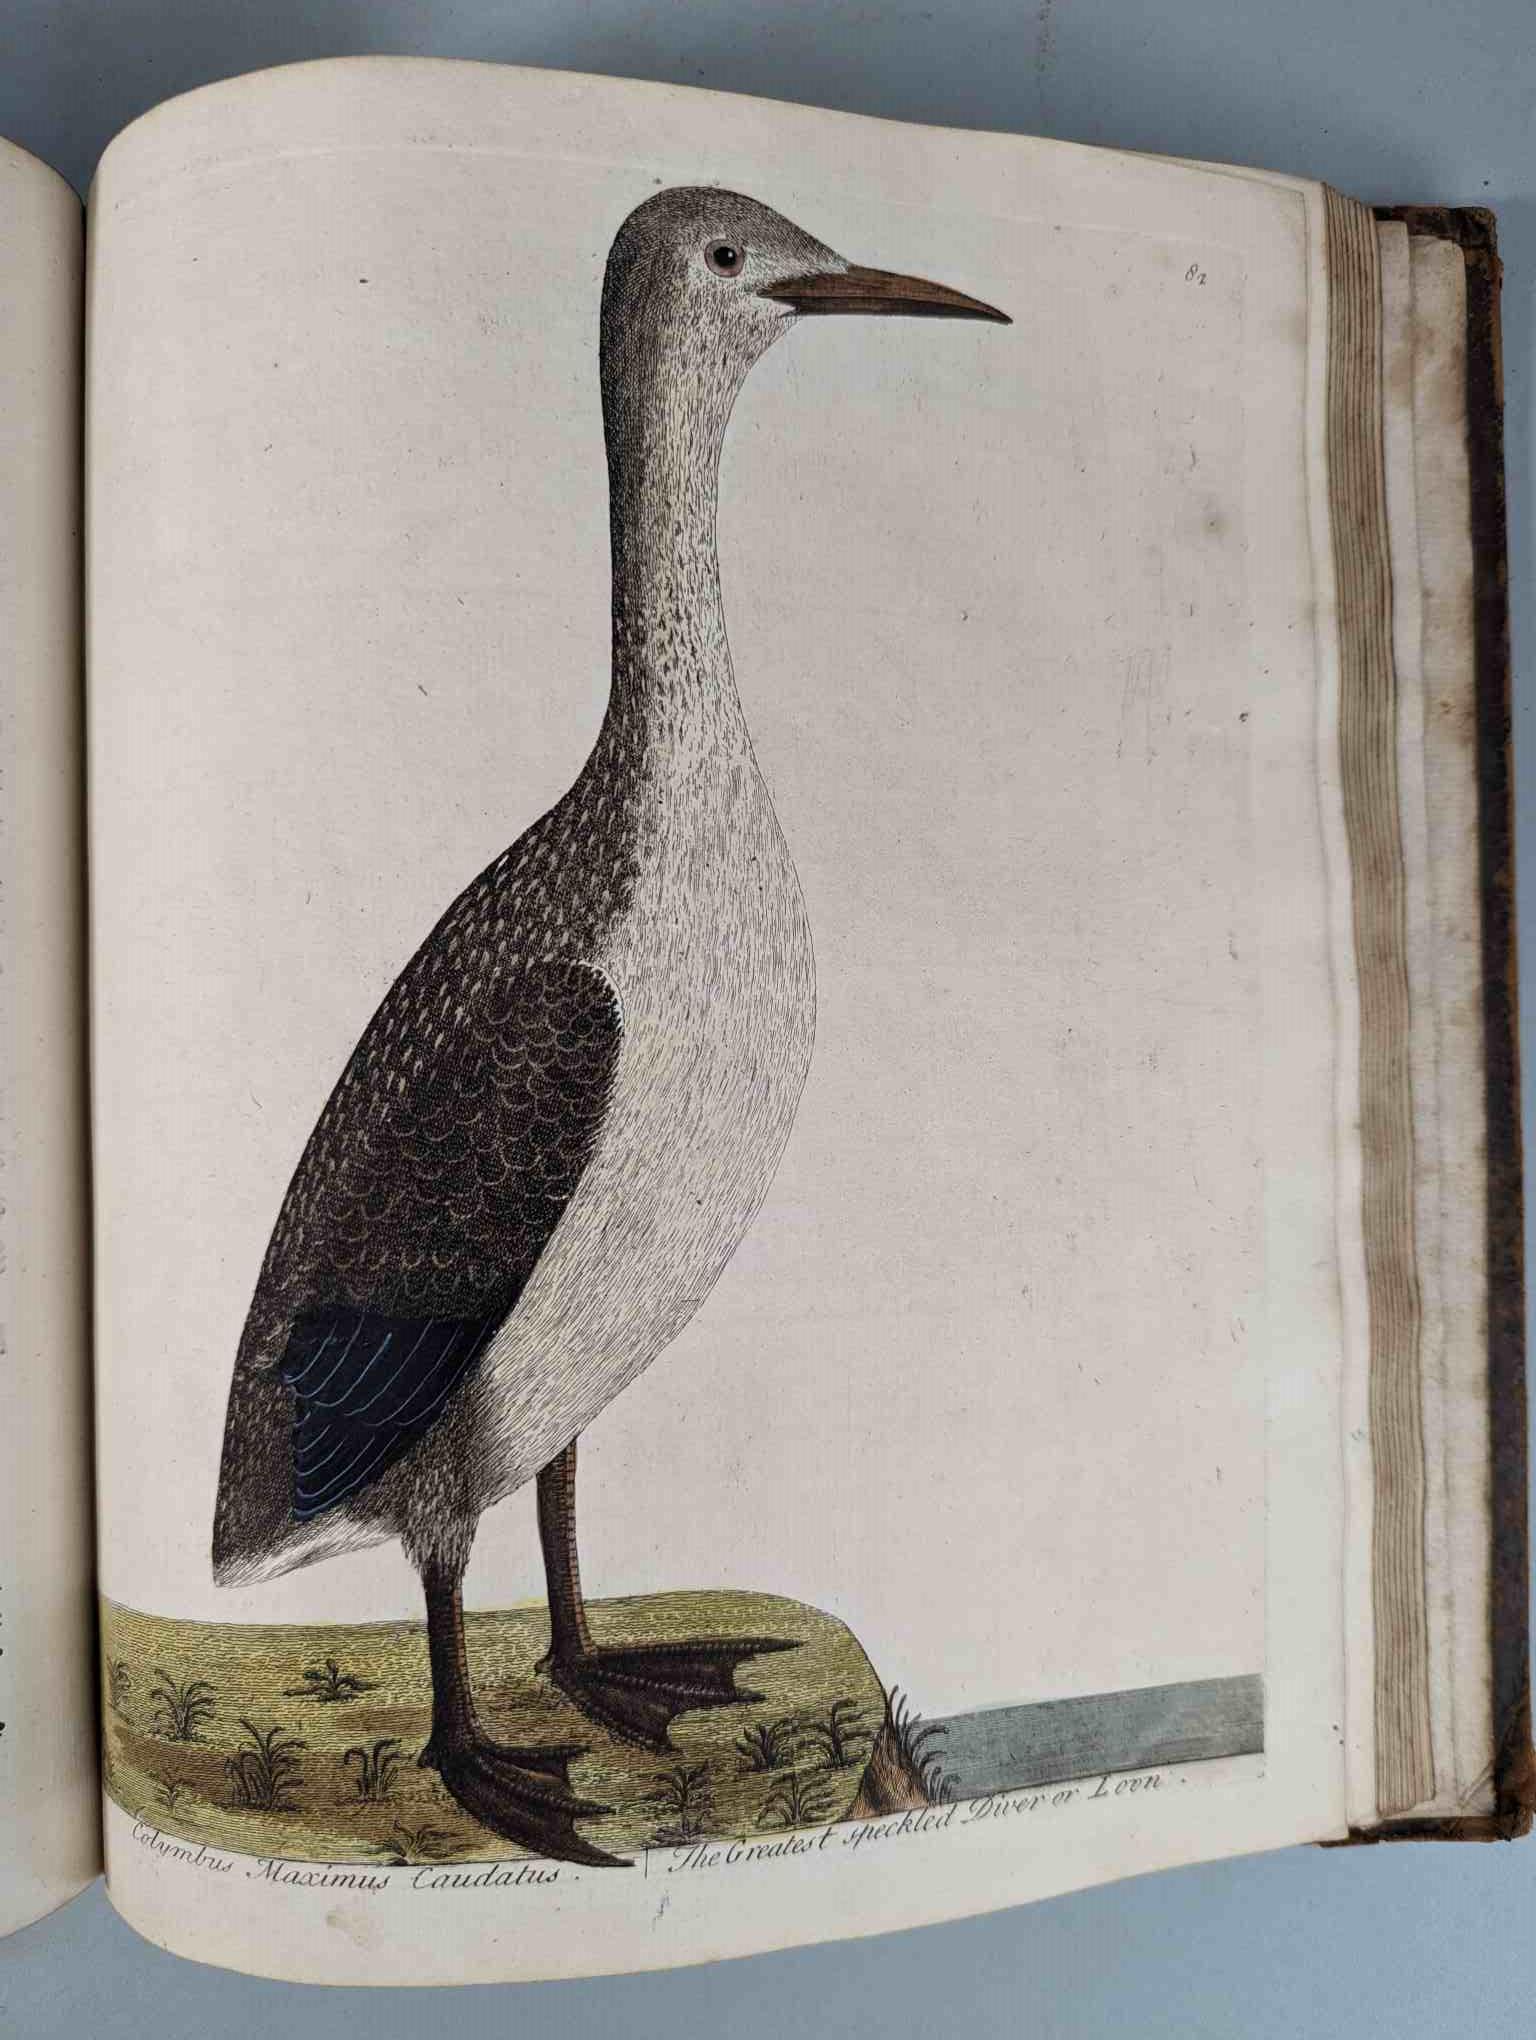 ALBIN, Eleazar. A Natural History of Birds, to which are added, Notes and Observations by W. - Image 85 of 208